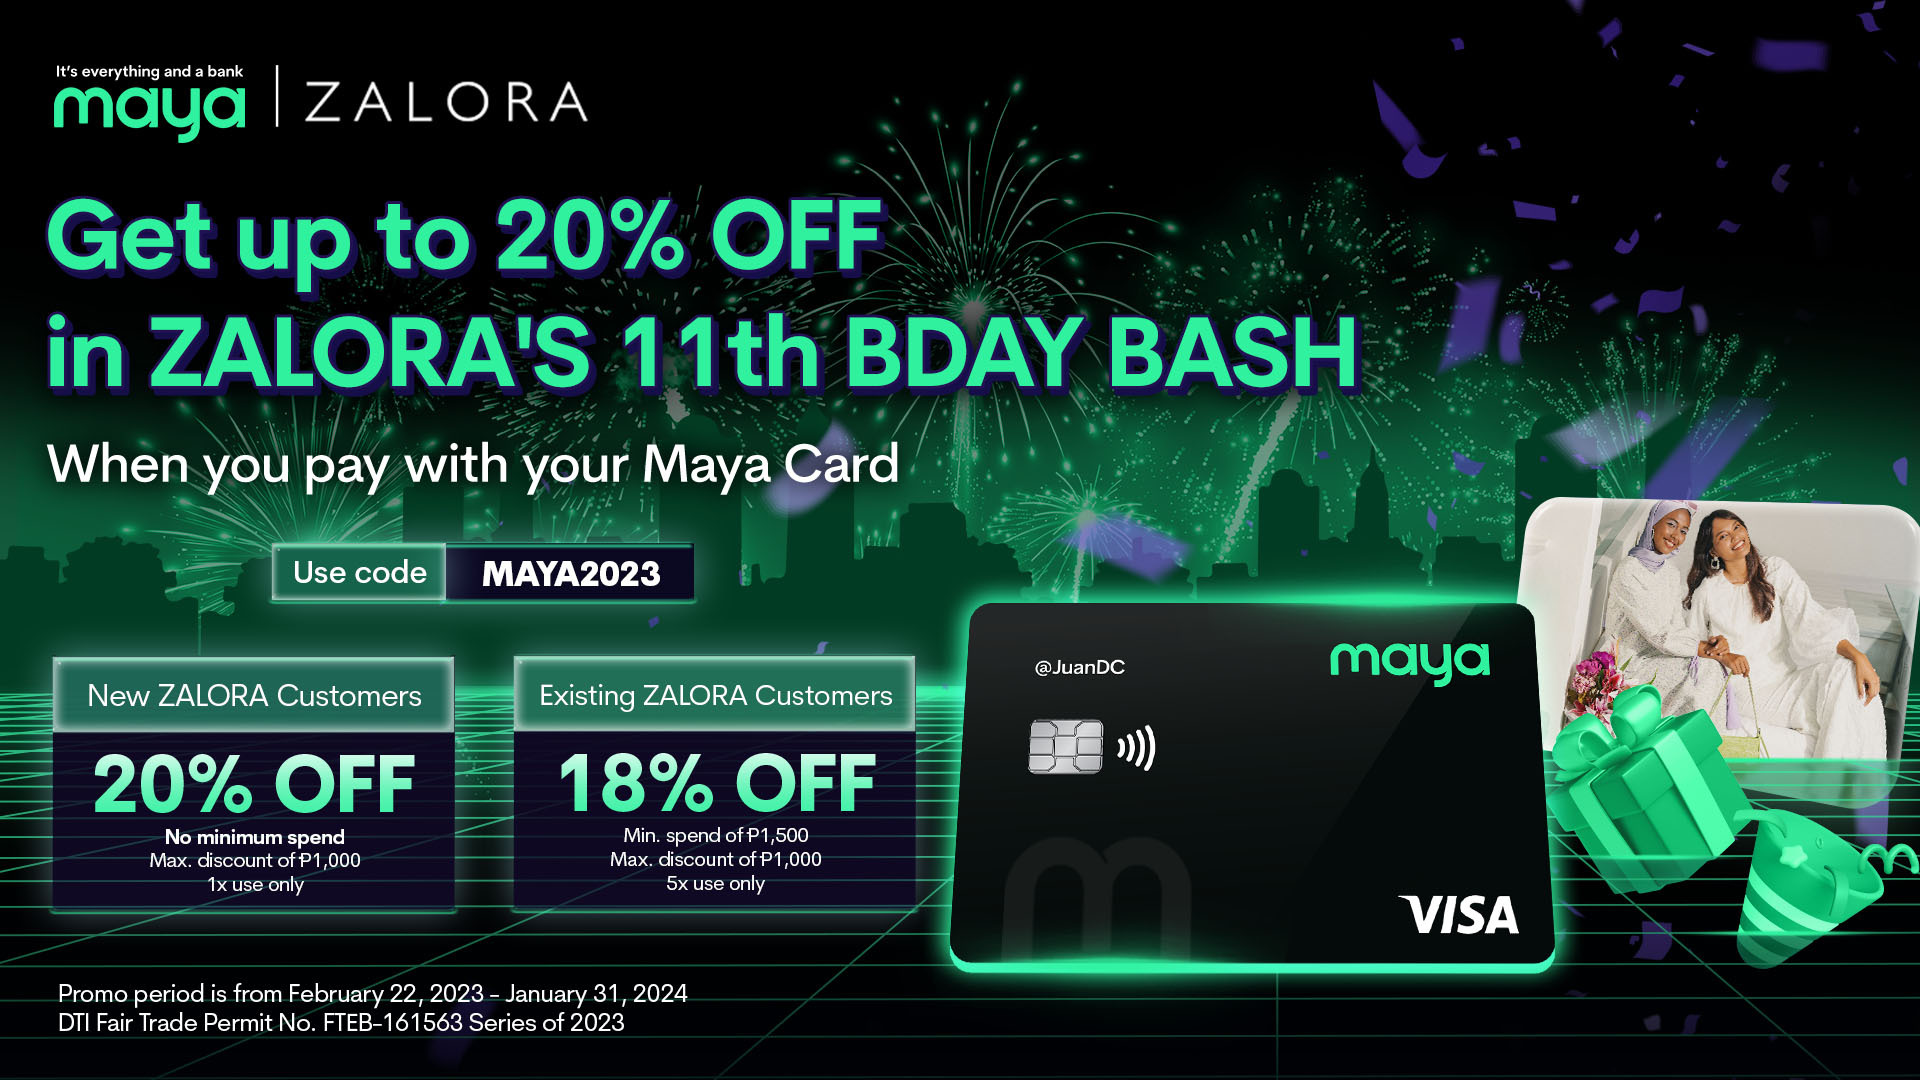 Enjoy up to 20% OFF on Zalora purchase with your Maya Card!